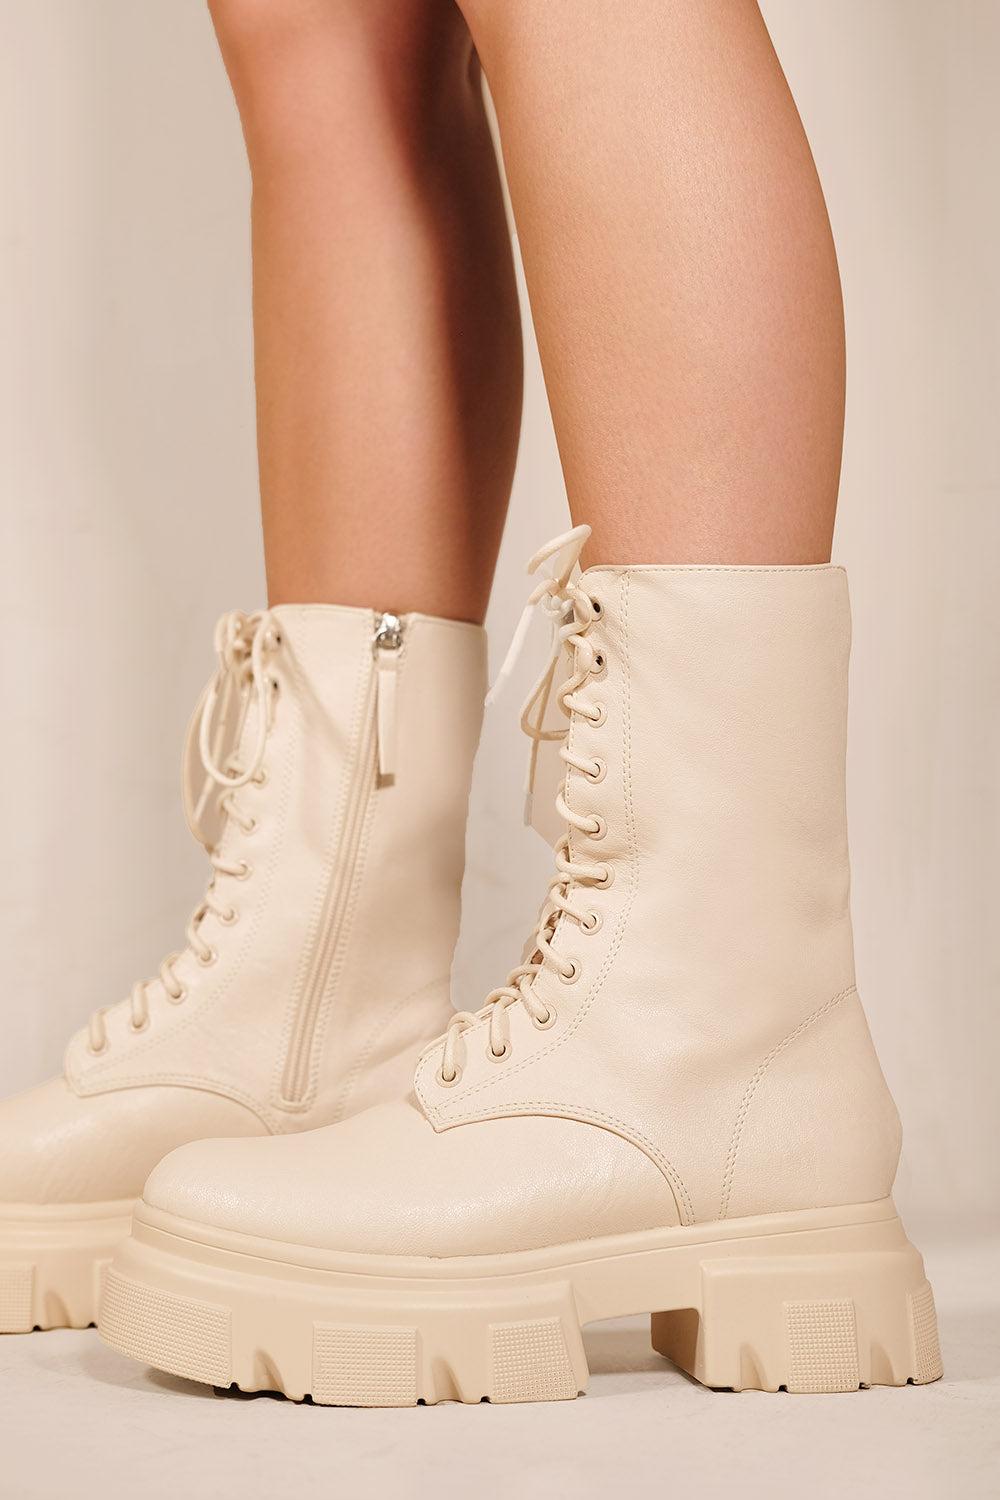 Where's That From Yareley Chunky Sole Ankle Boots With Lace Up Detail in  Natural | Lyst